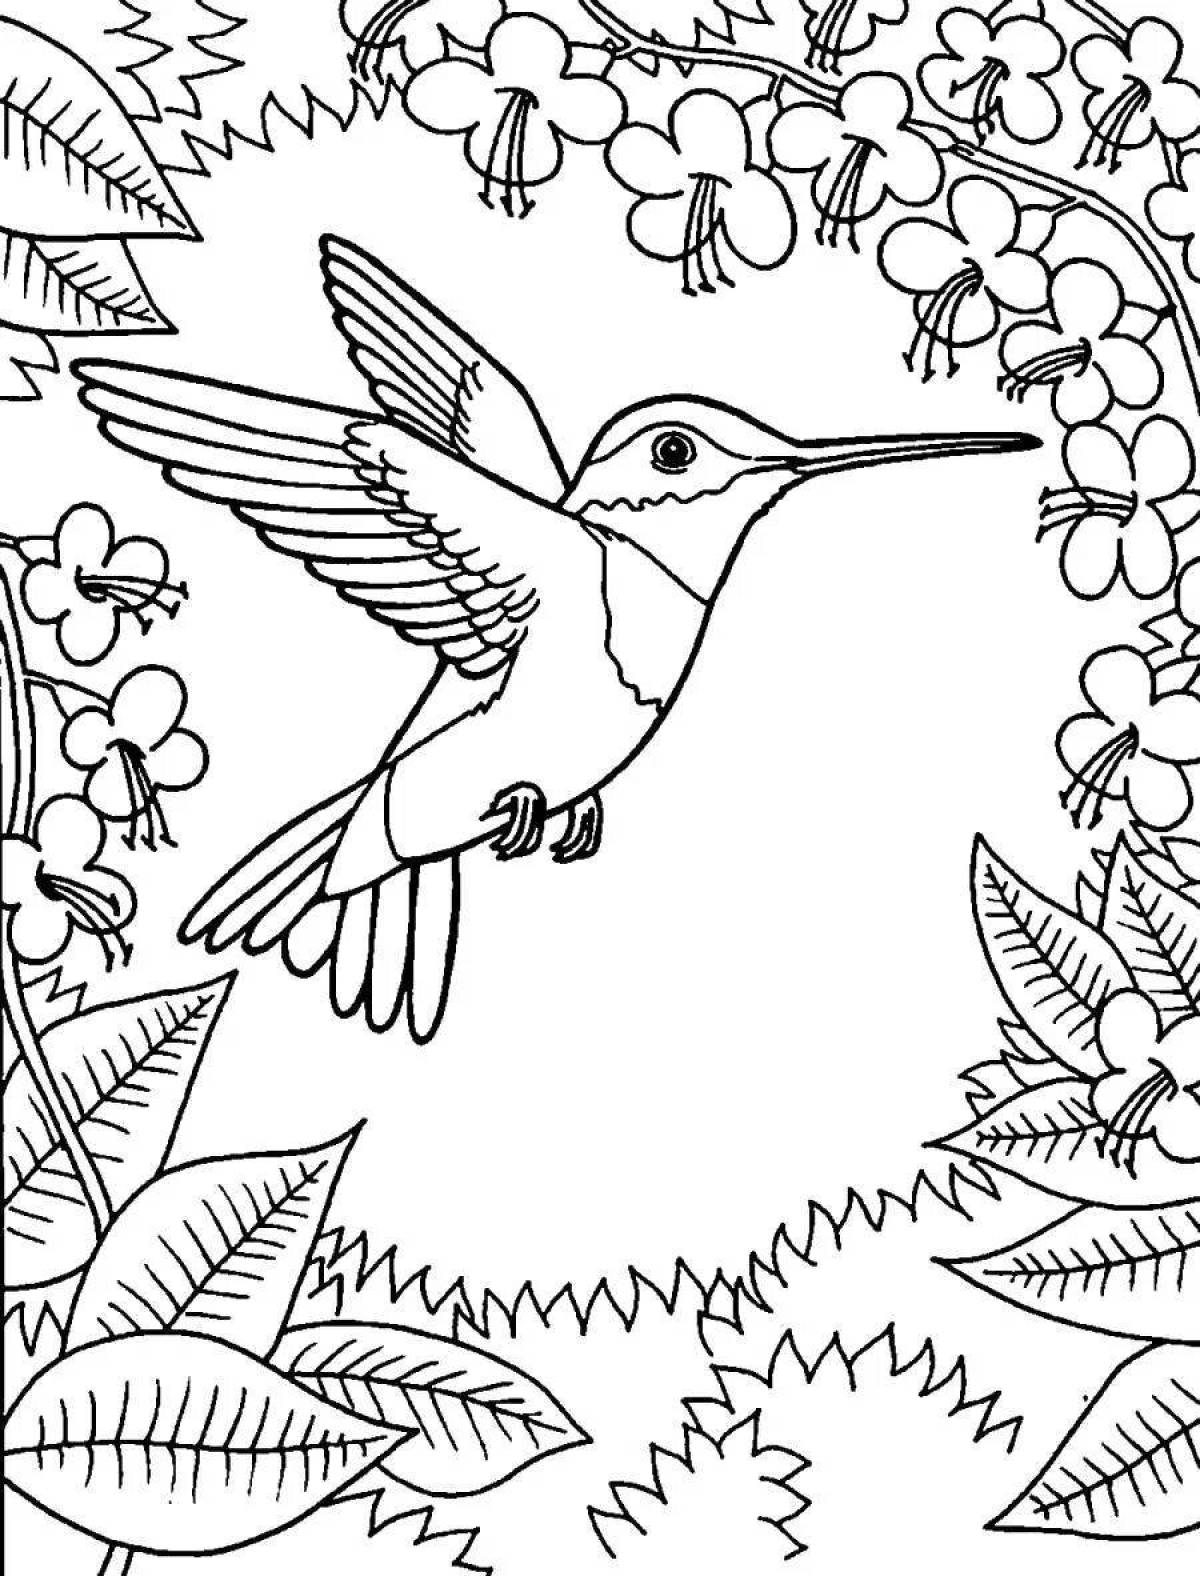 Fun coloring book for girls with birds